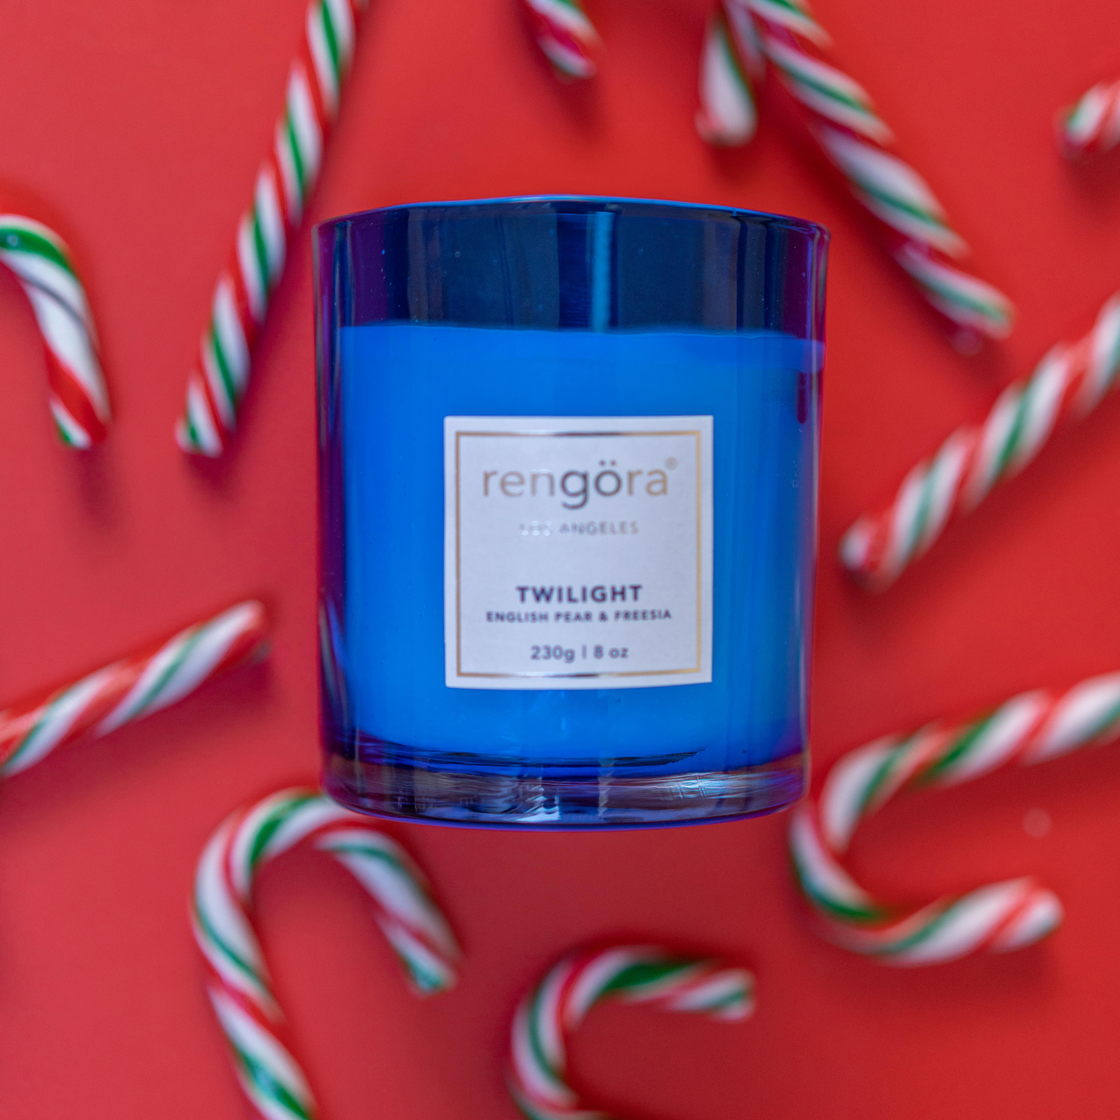 The Rengöra's Twilight-scented home candle set against a festive red Christmas-themed background adorned with Christmas candies